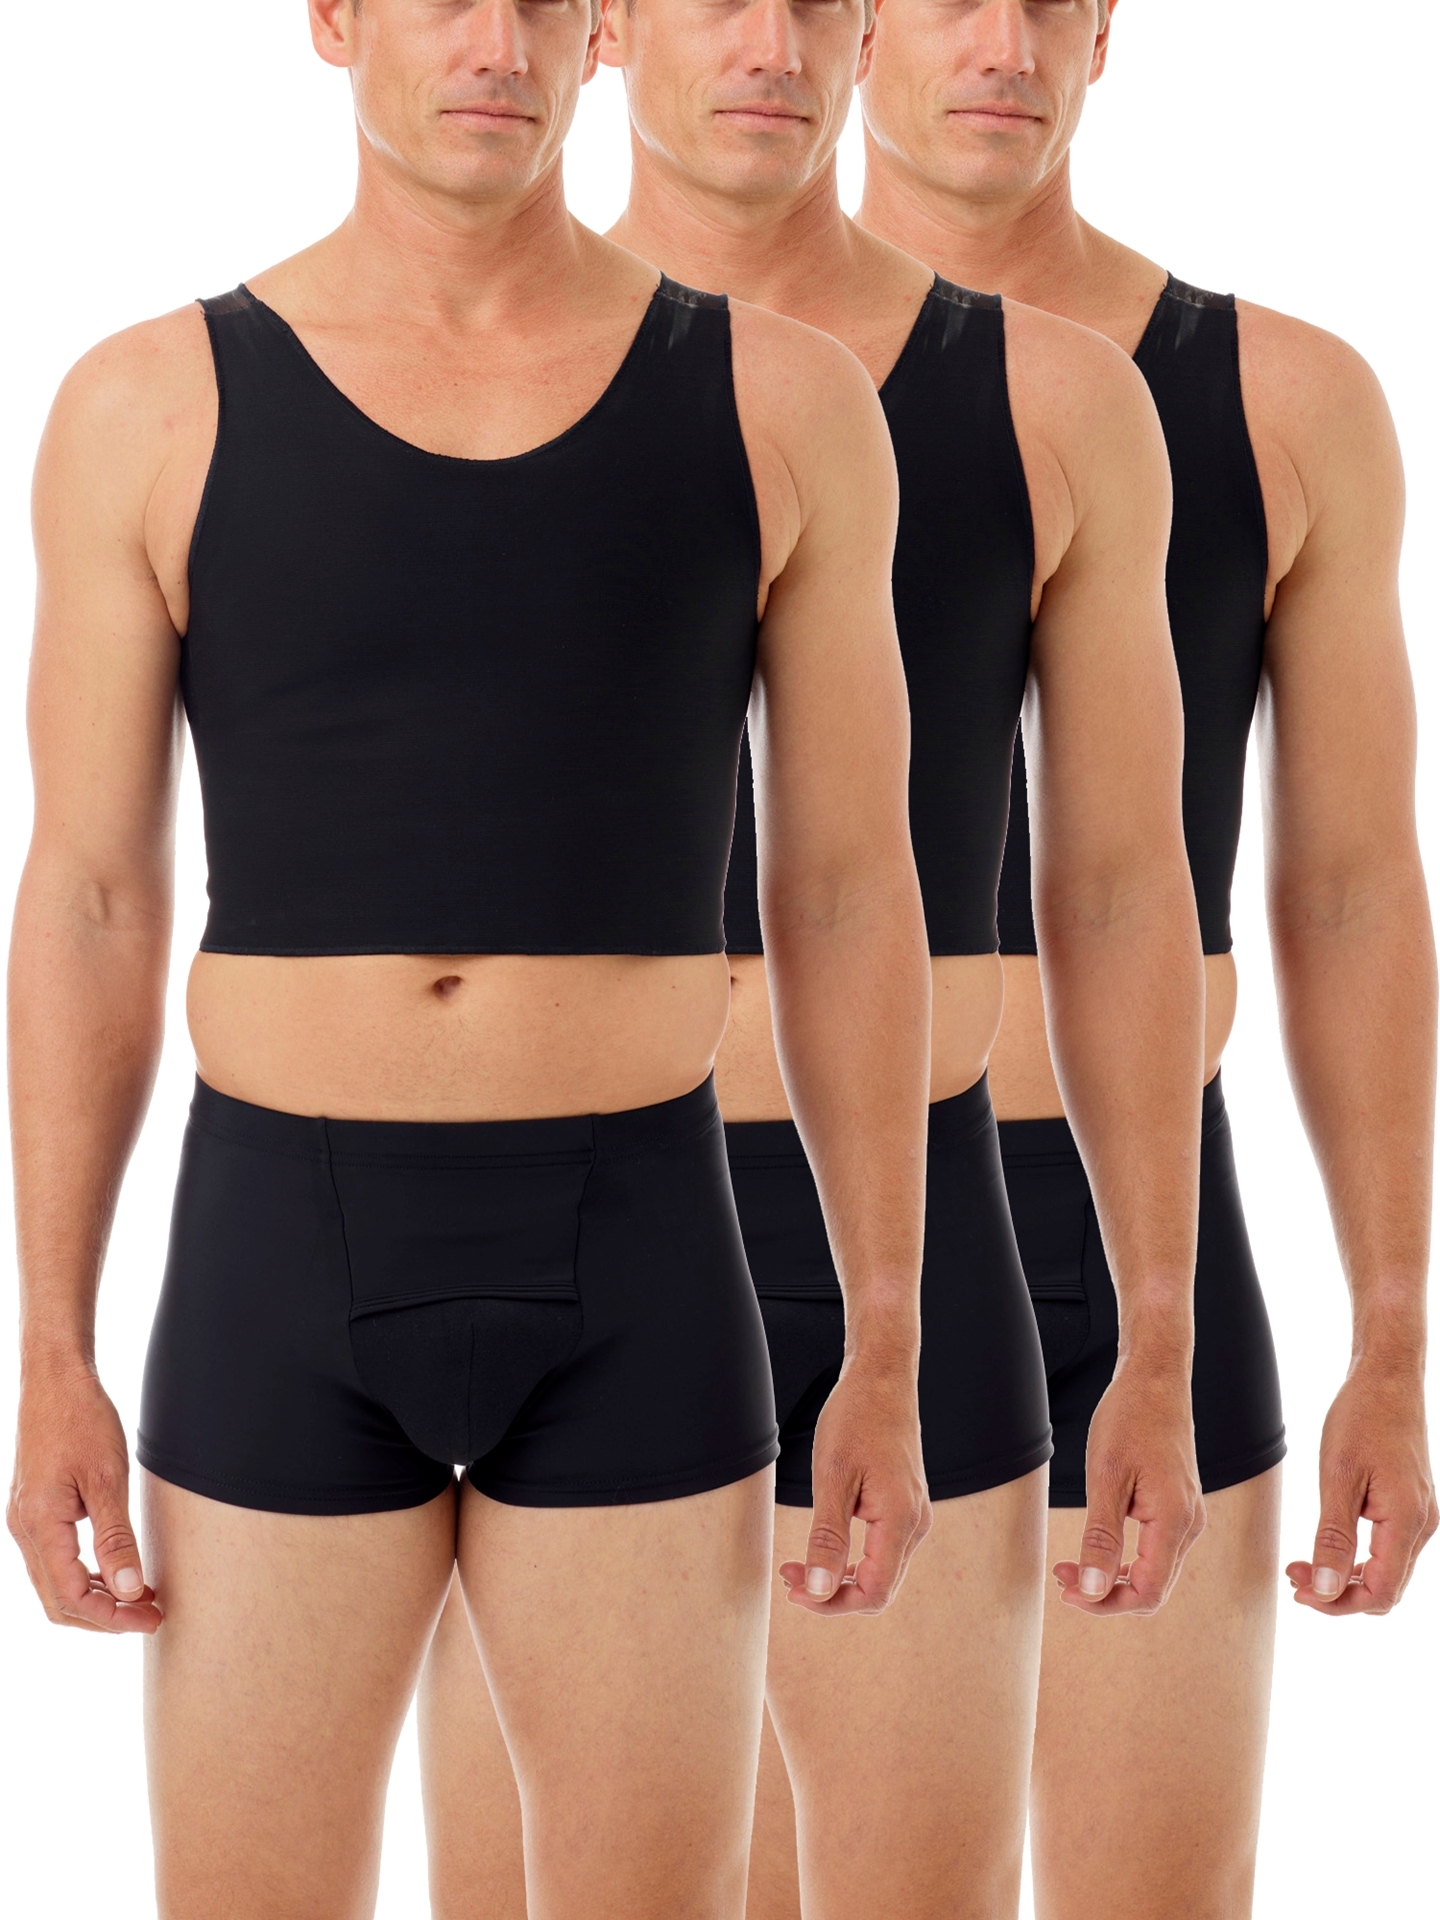 https://www.underworks.com/images/thumbs/0001100_tri-top-chest-binder-3-pack.jpeg